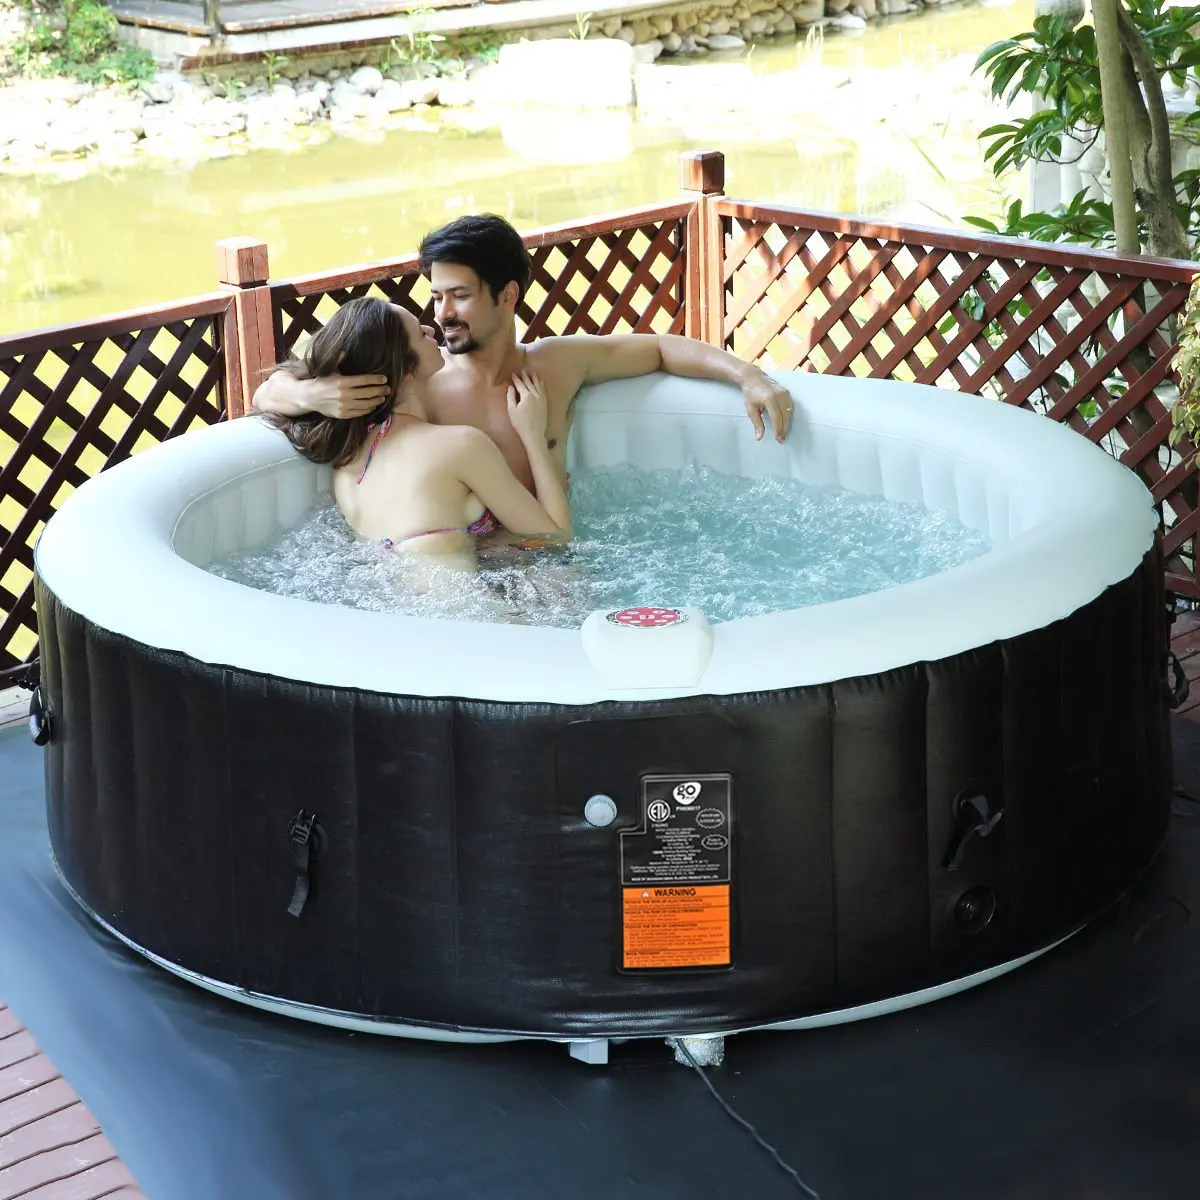 Goplus 6 Person Portable Inflatable Hot Tub for Outdoor Jets Bubble Massage...